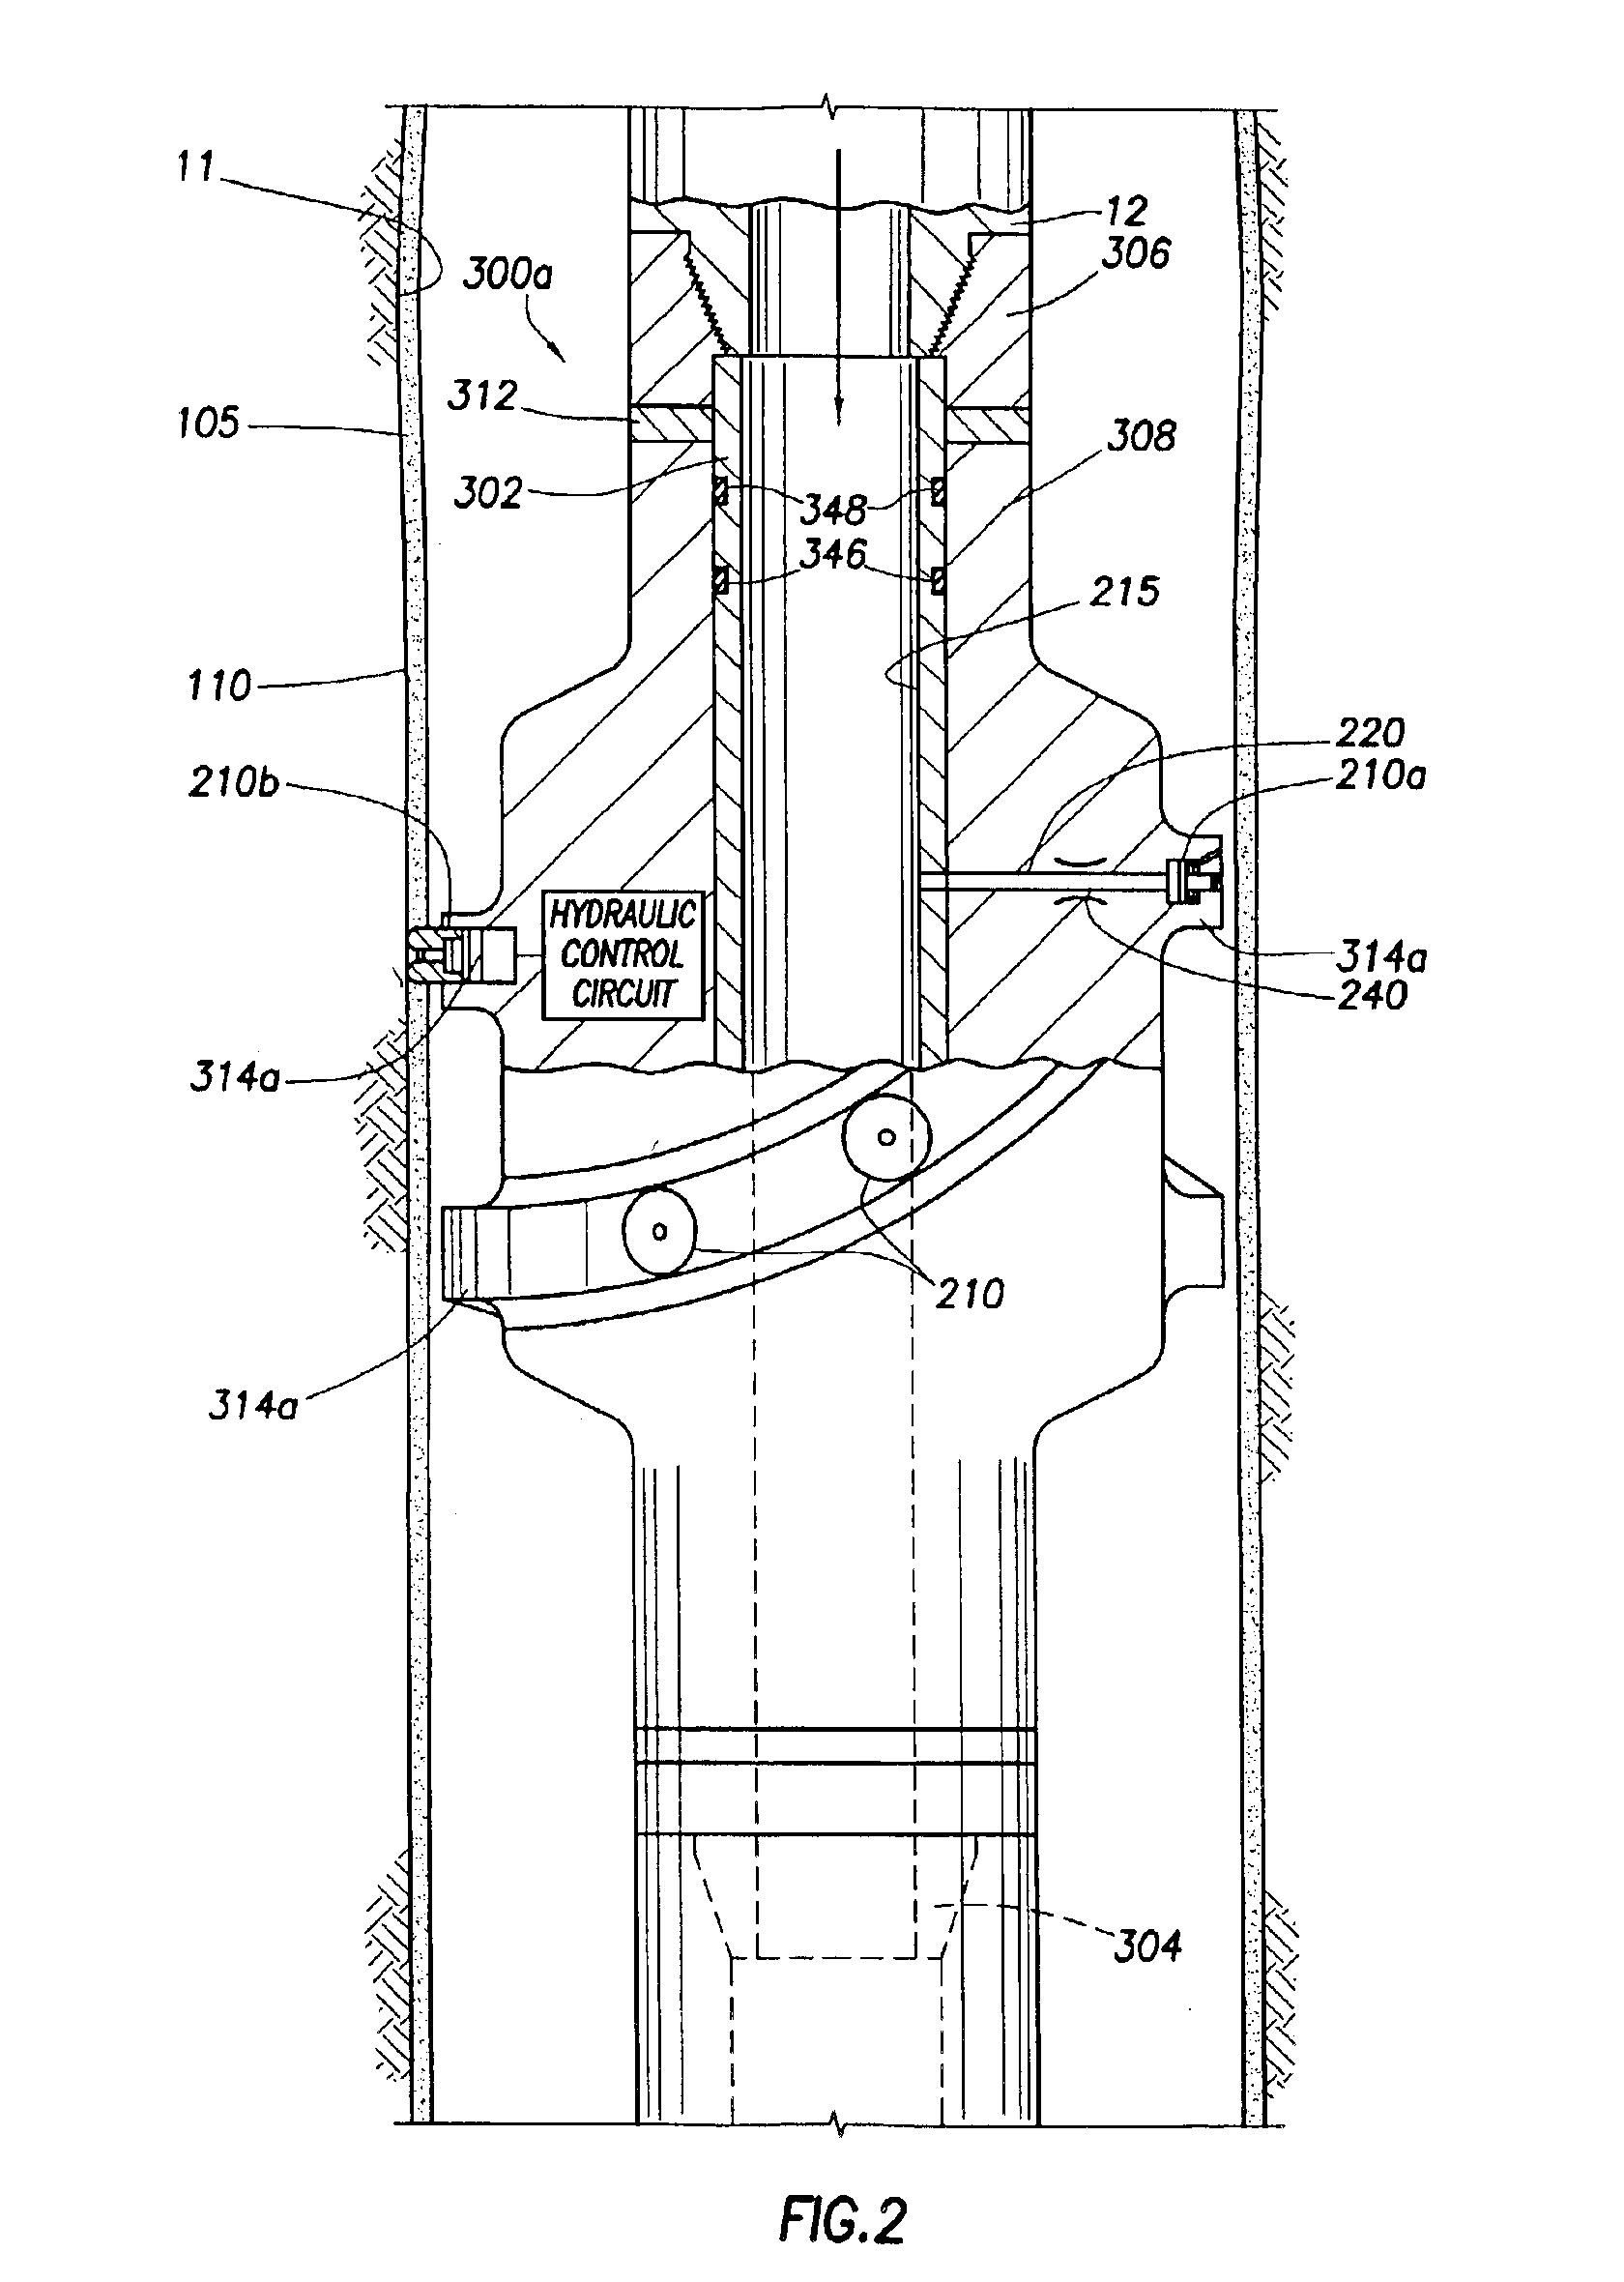 Method and apparatus for determining downhole pressures during a drilling operation